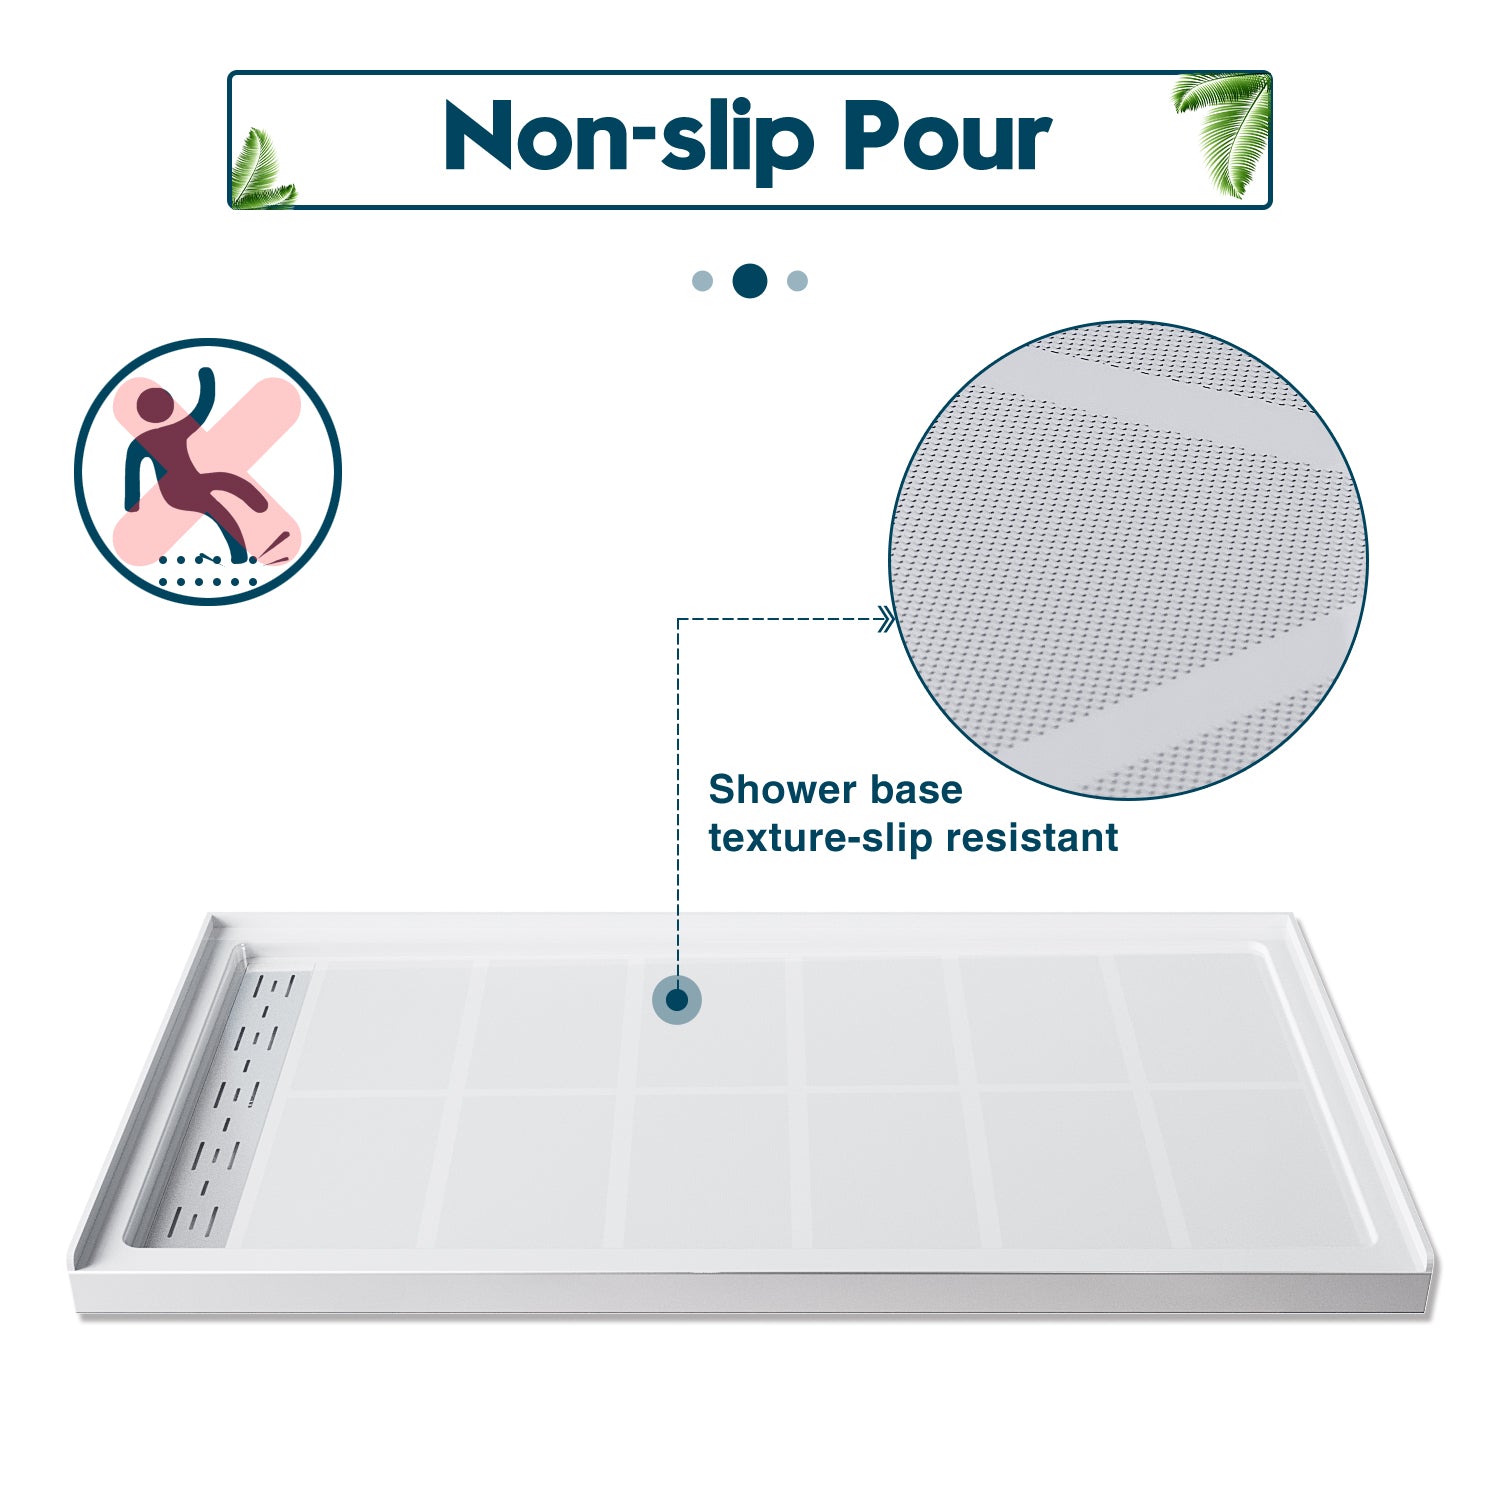 Anti-slip granules design in shower base surface, prevent you falling while not wearing shoes.